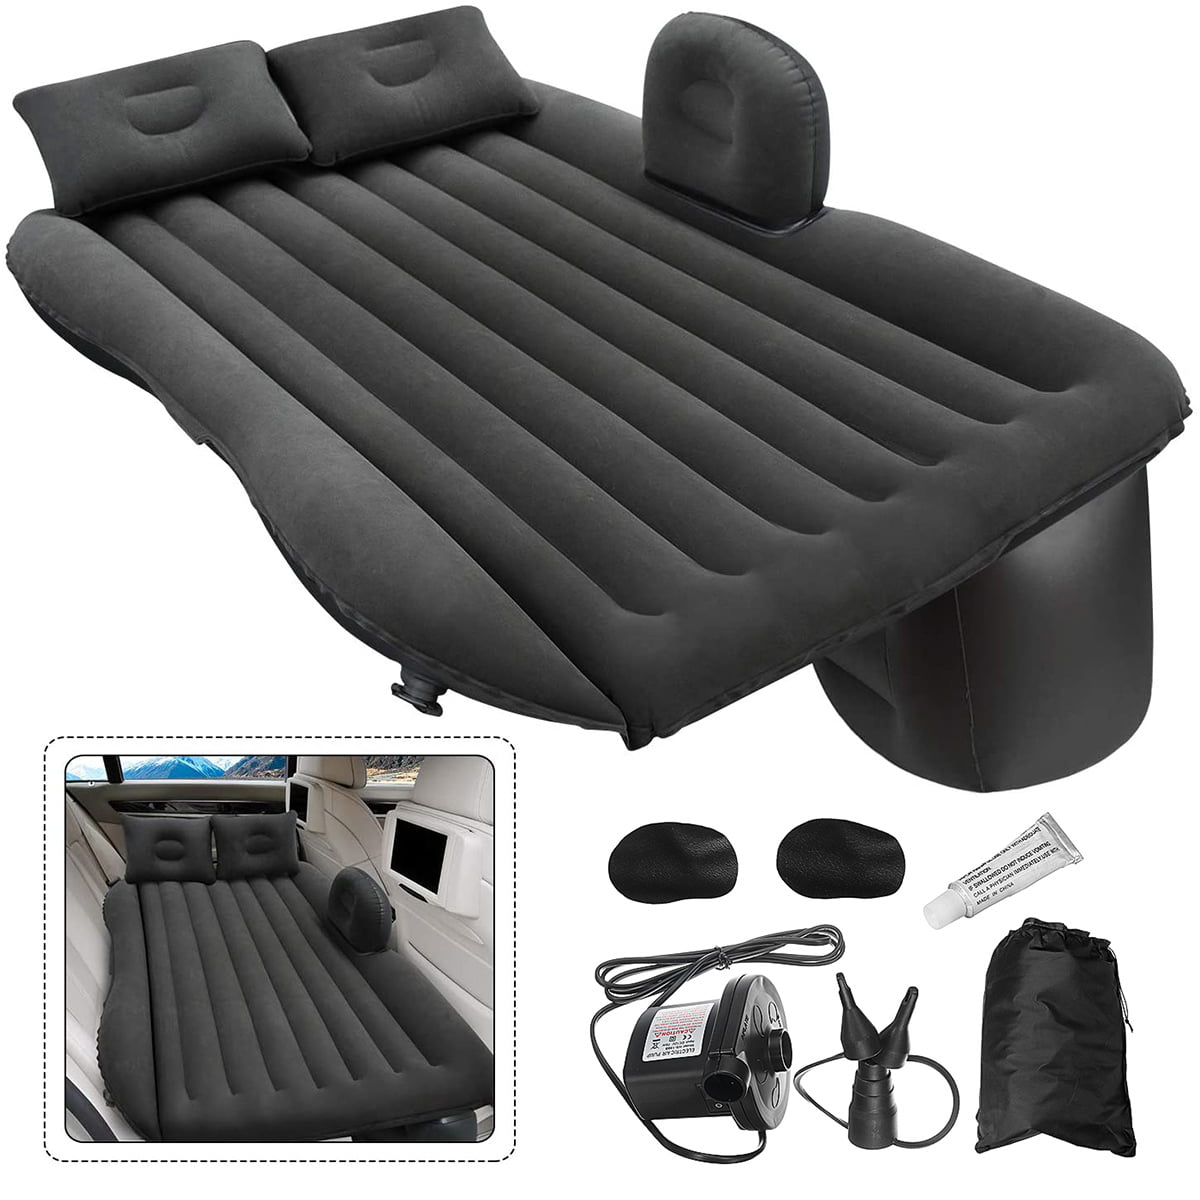 Car Inflatable Air Bed Mattress Back Rear Seat & 2 Pillows 2 Stools For Travel 